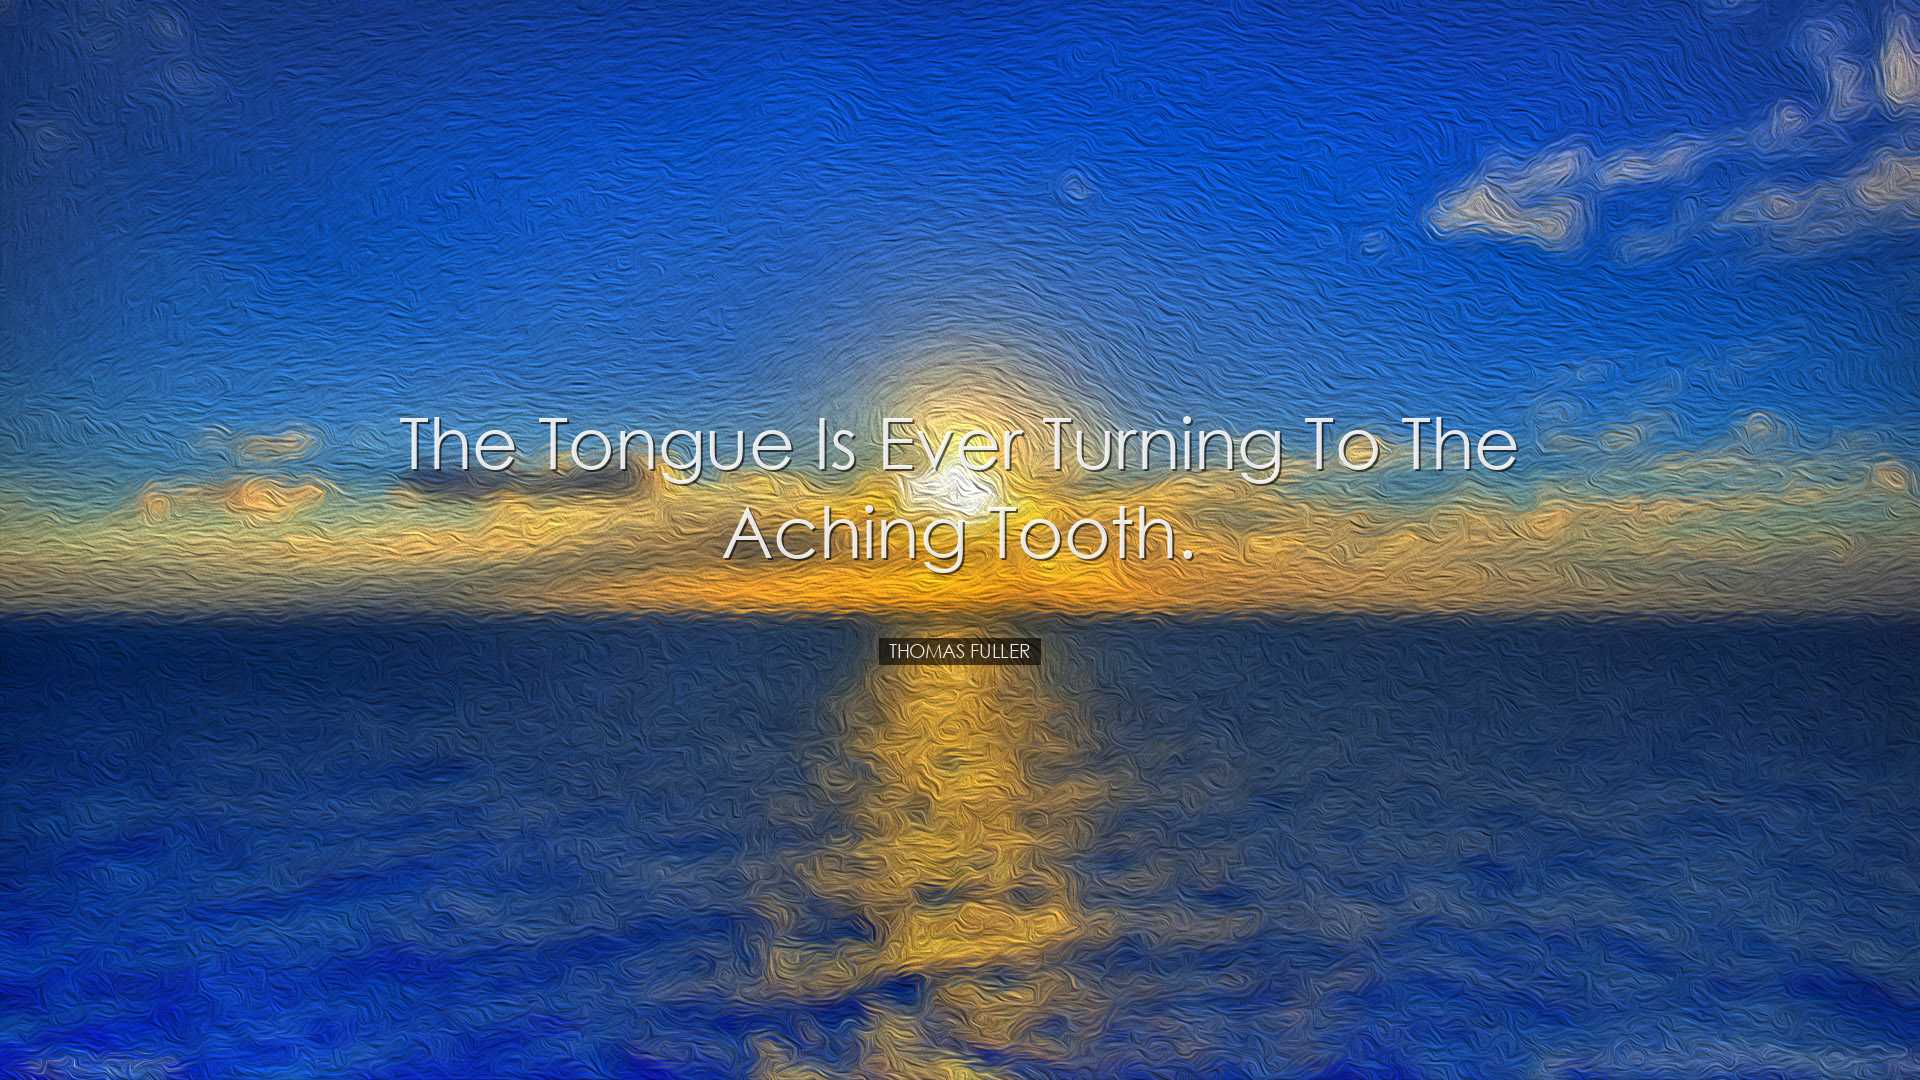 The tongue is ever turning to the aching tooth. - Thomas Fuller